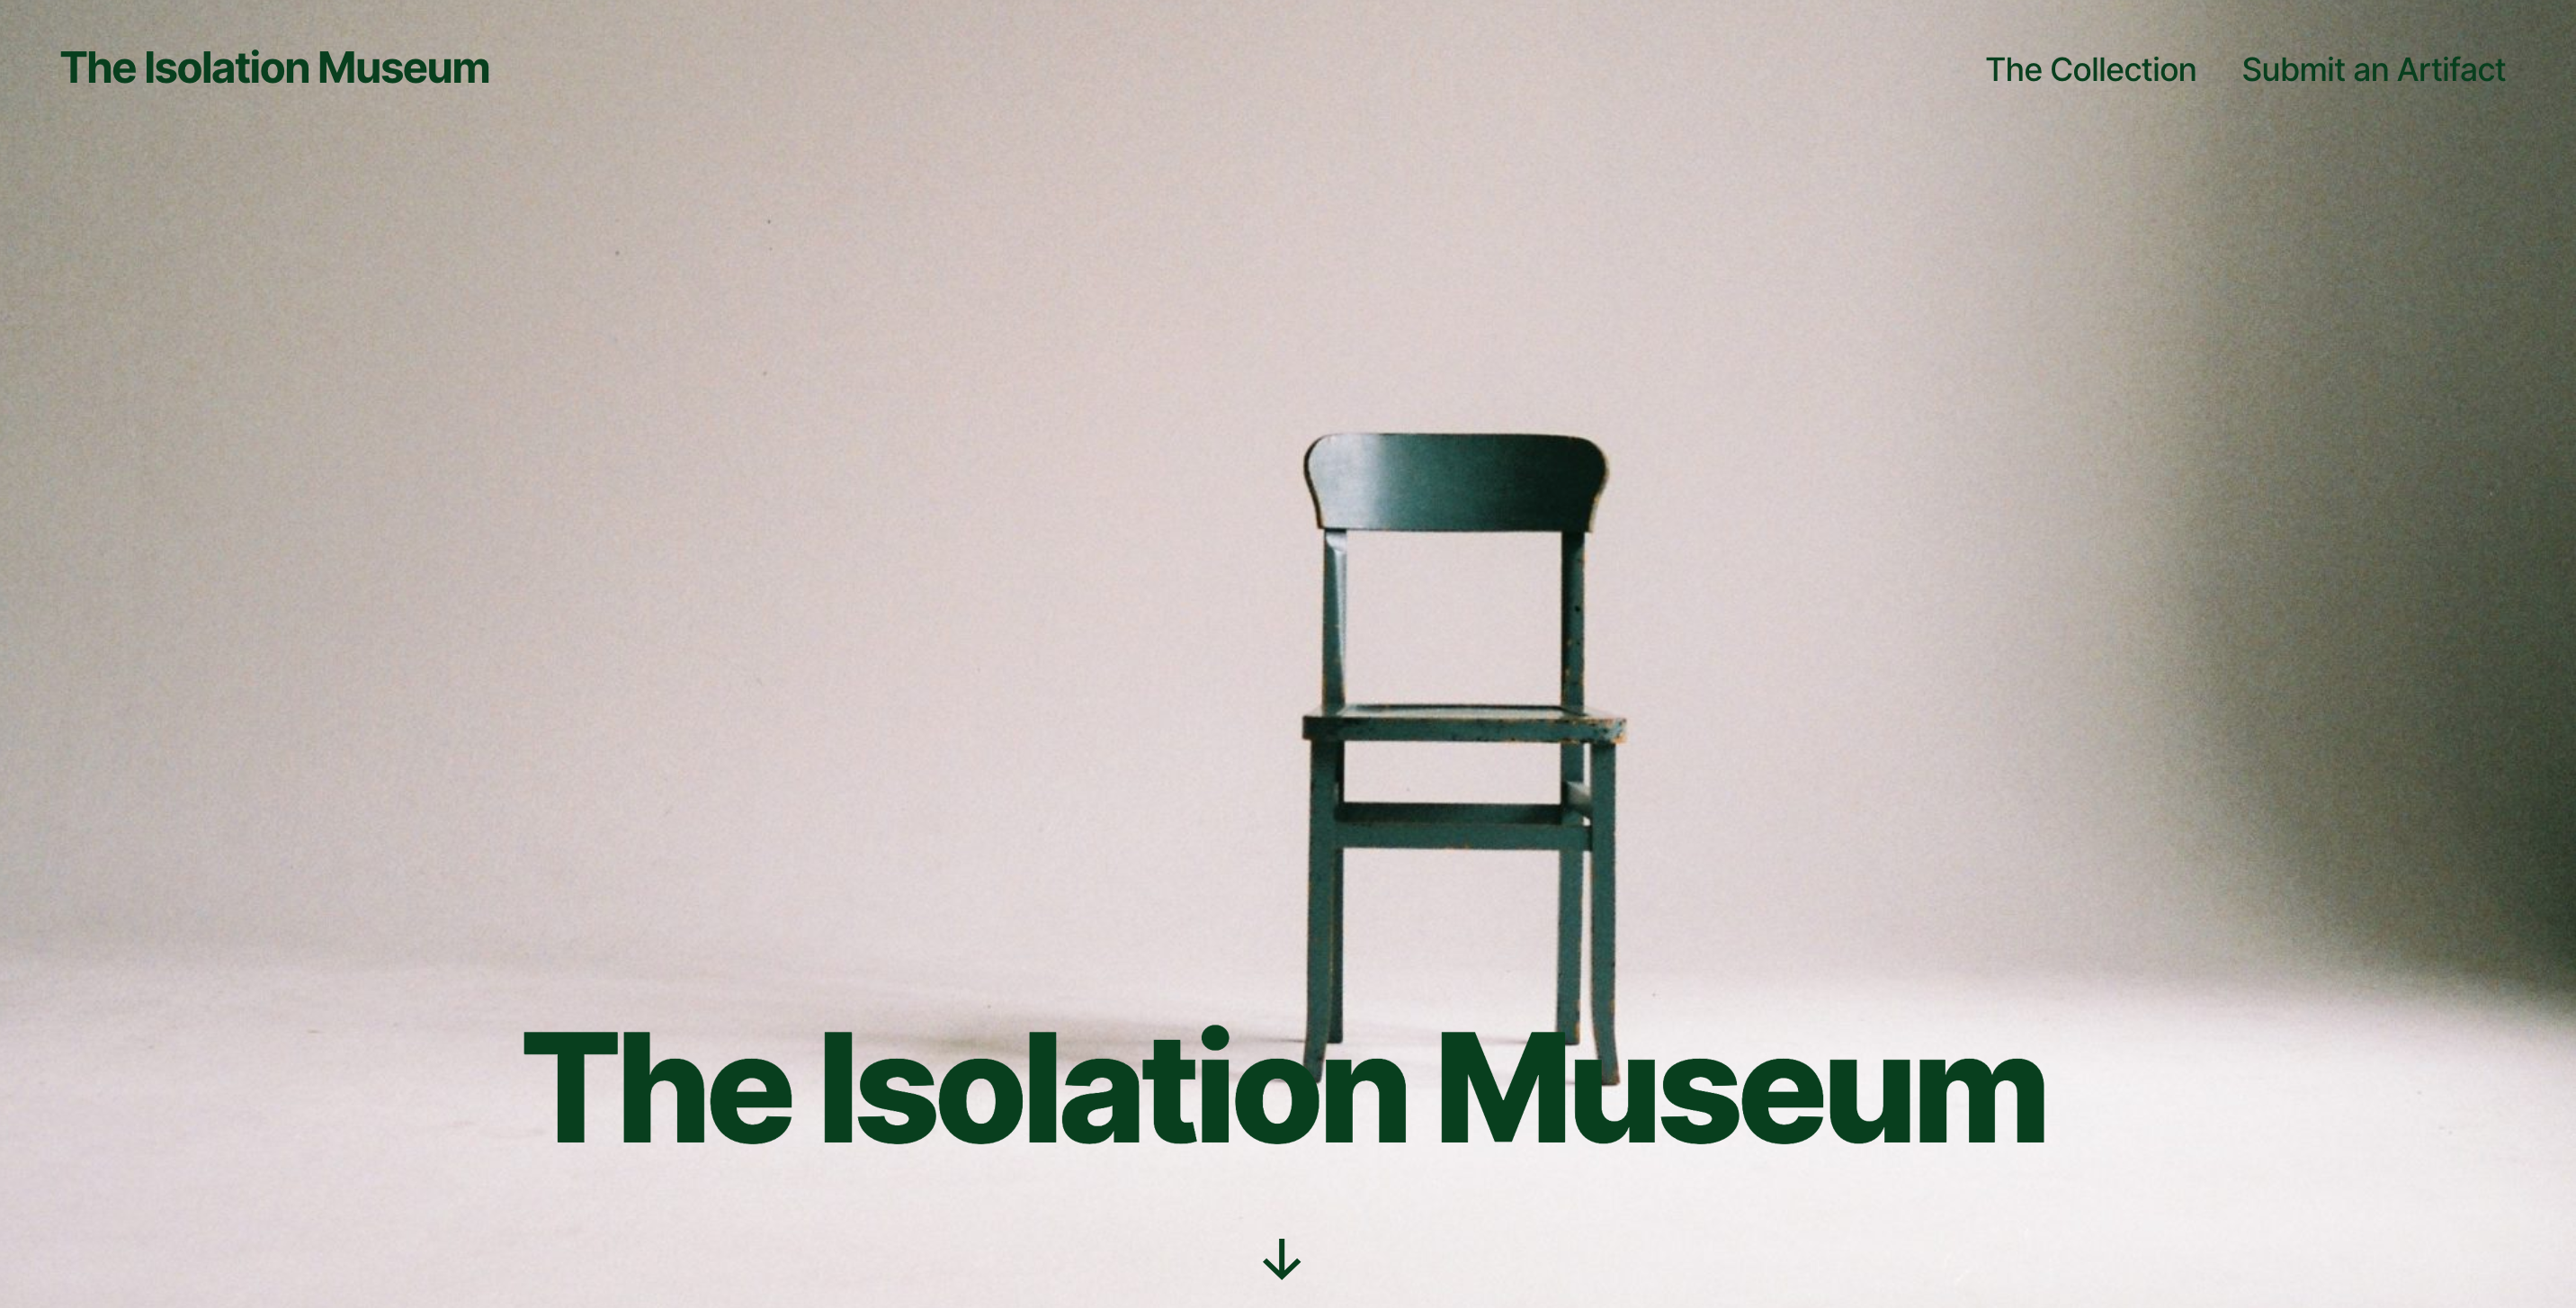 The Isolation Museum